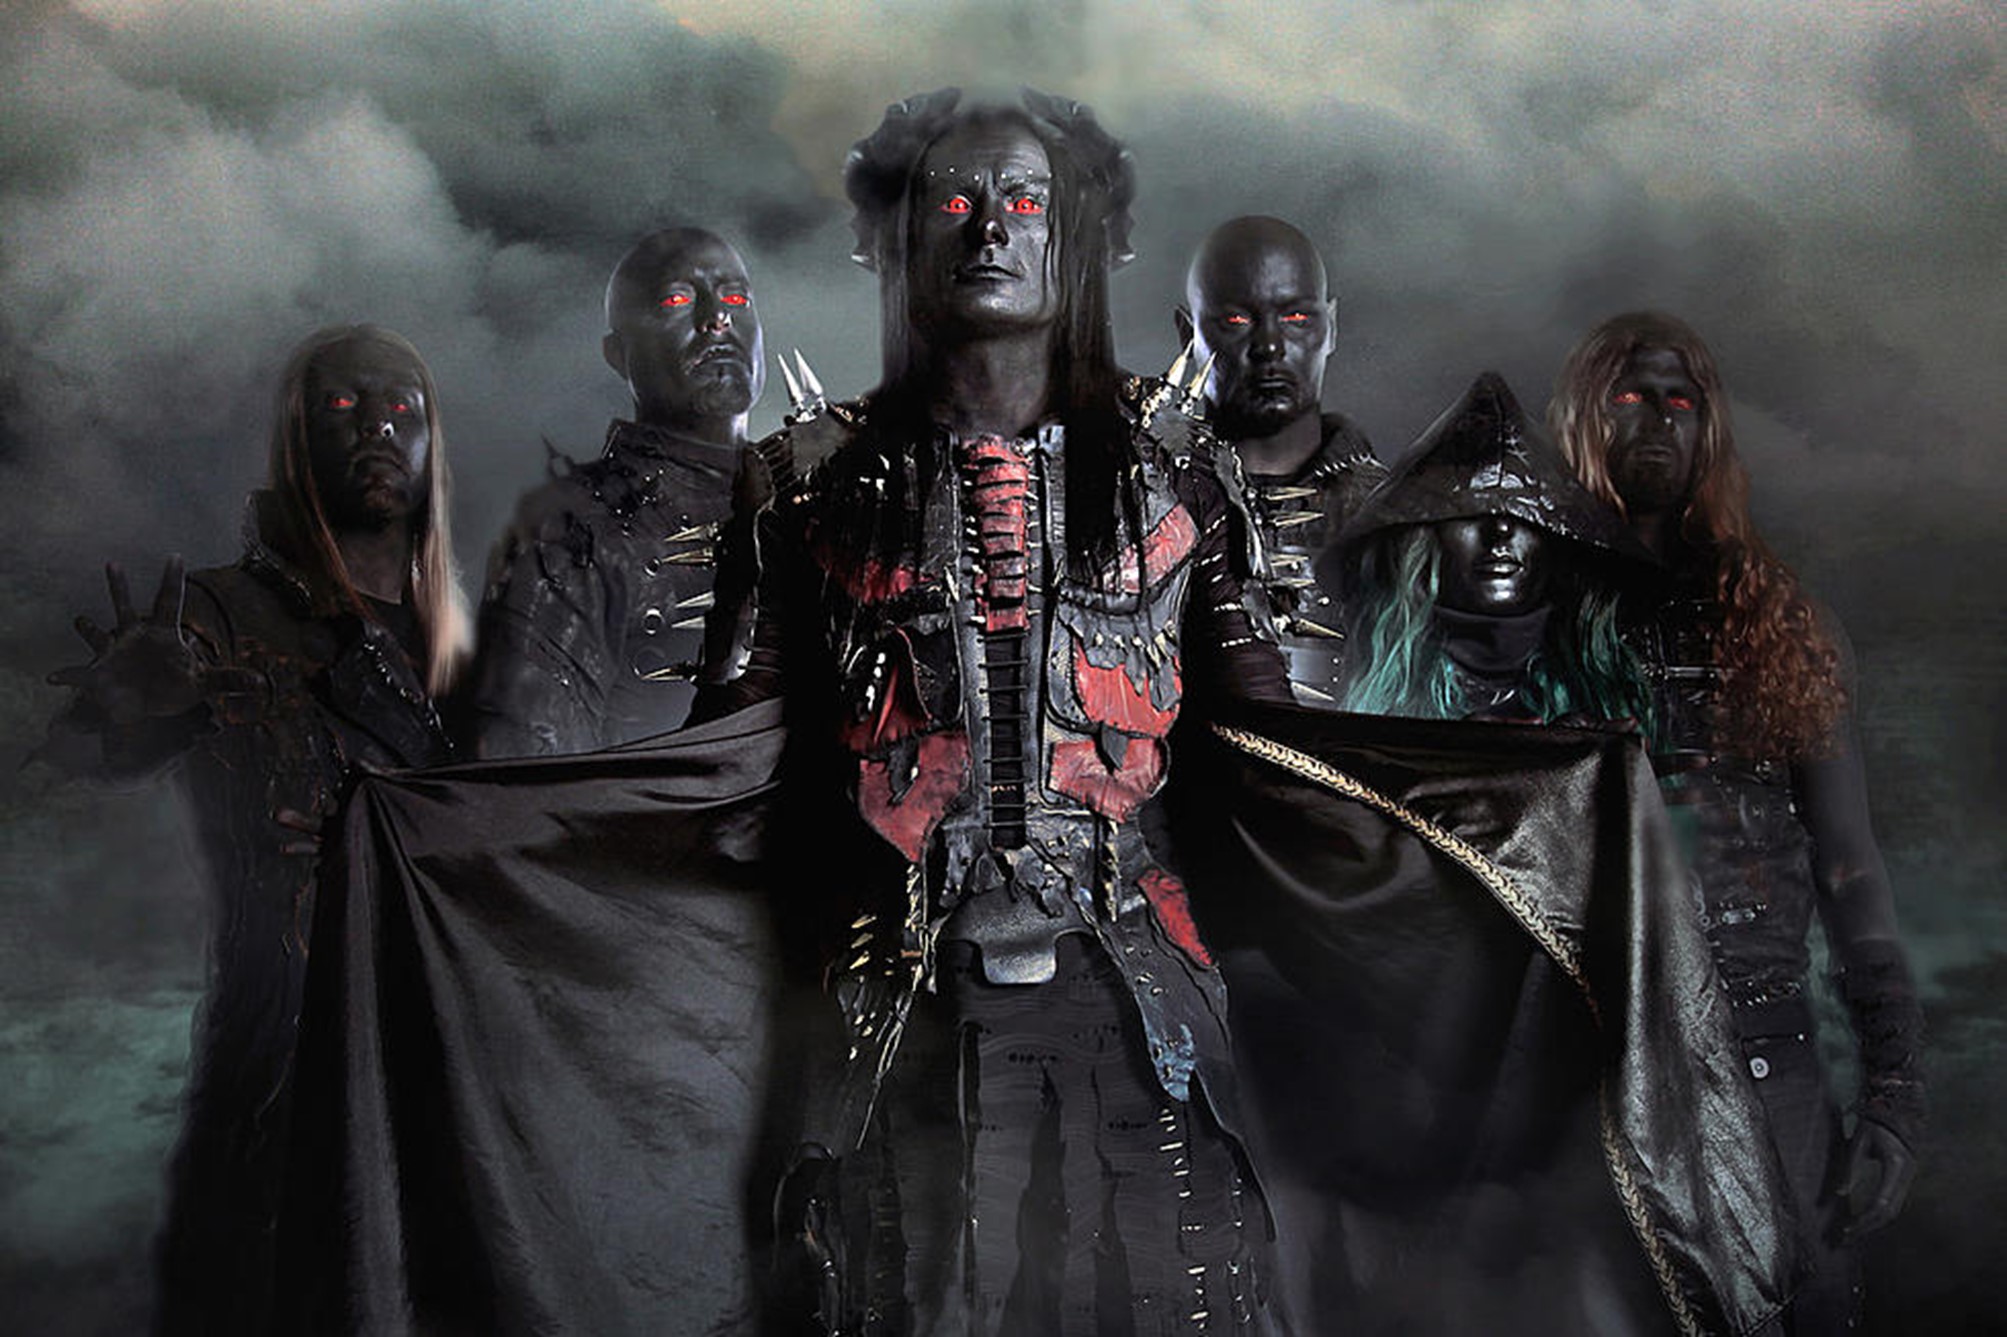 Fan Page for The Top Extreme Metal Band Cradle Of Filth